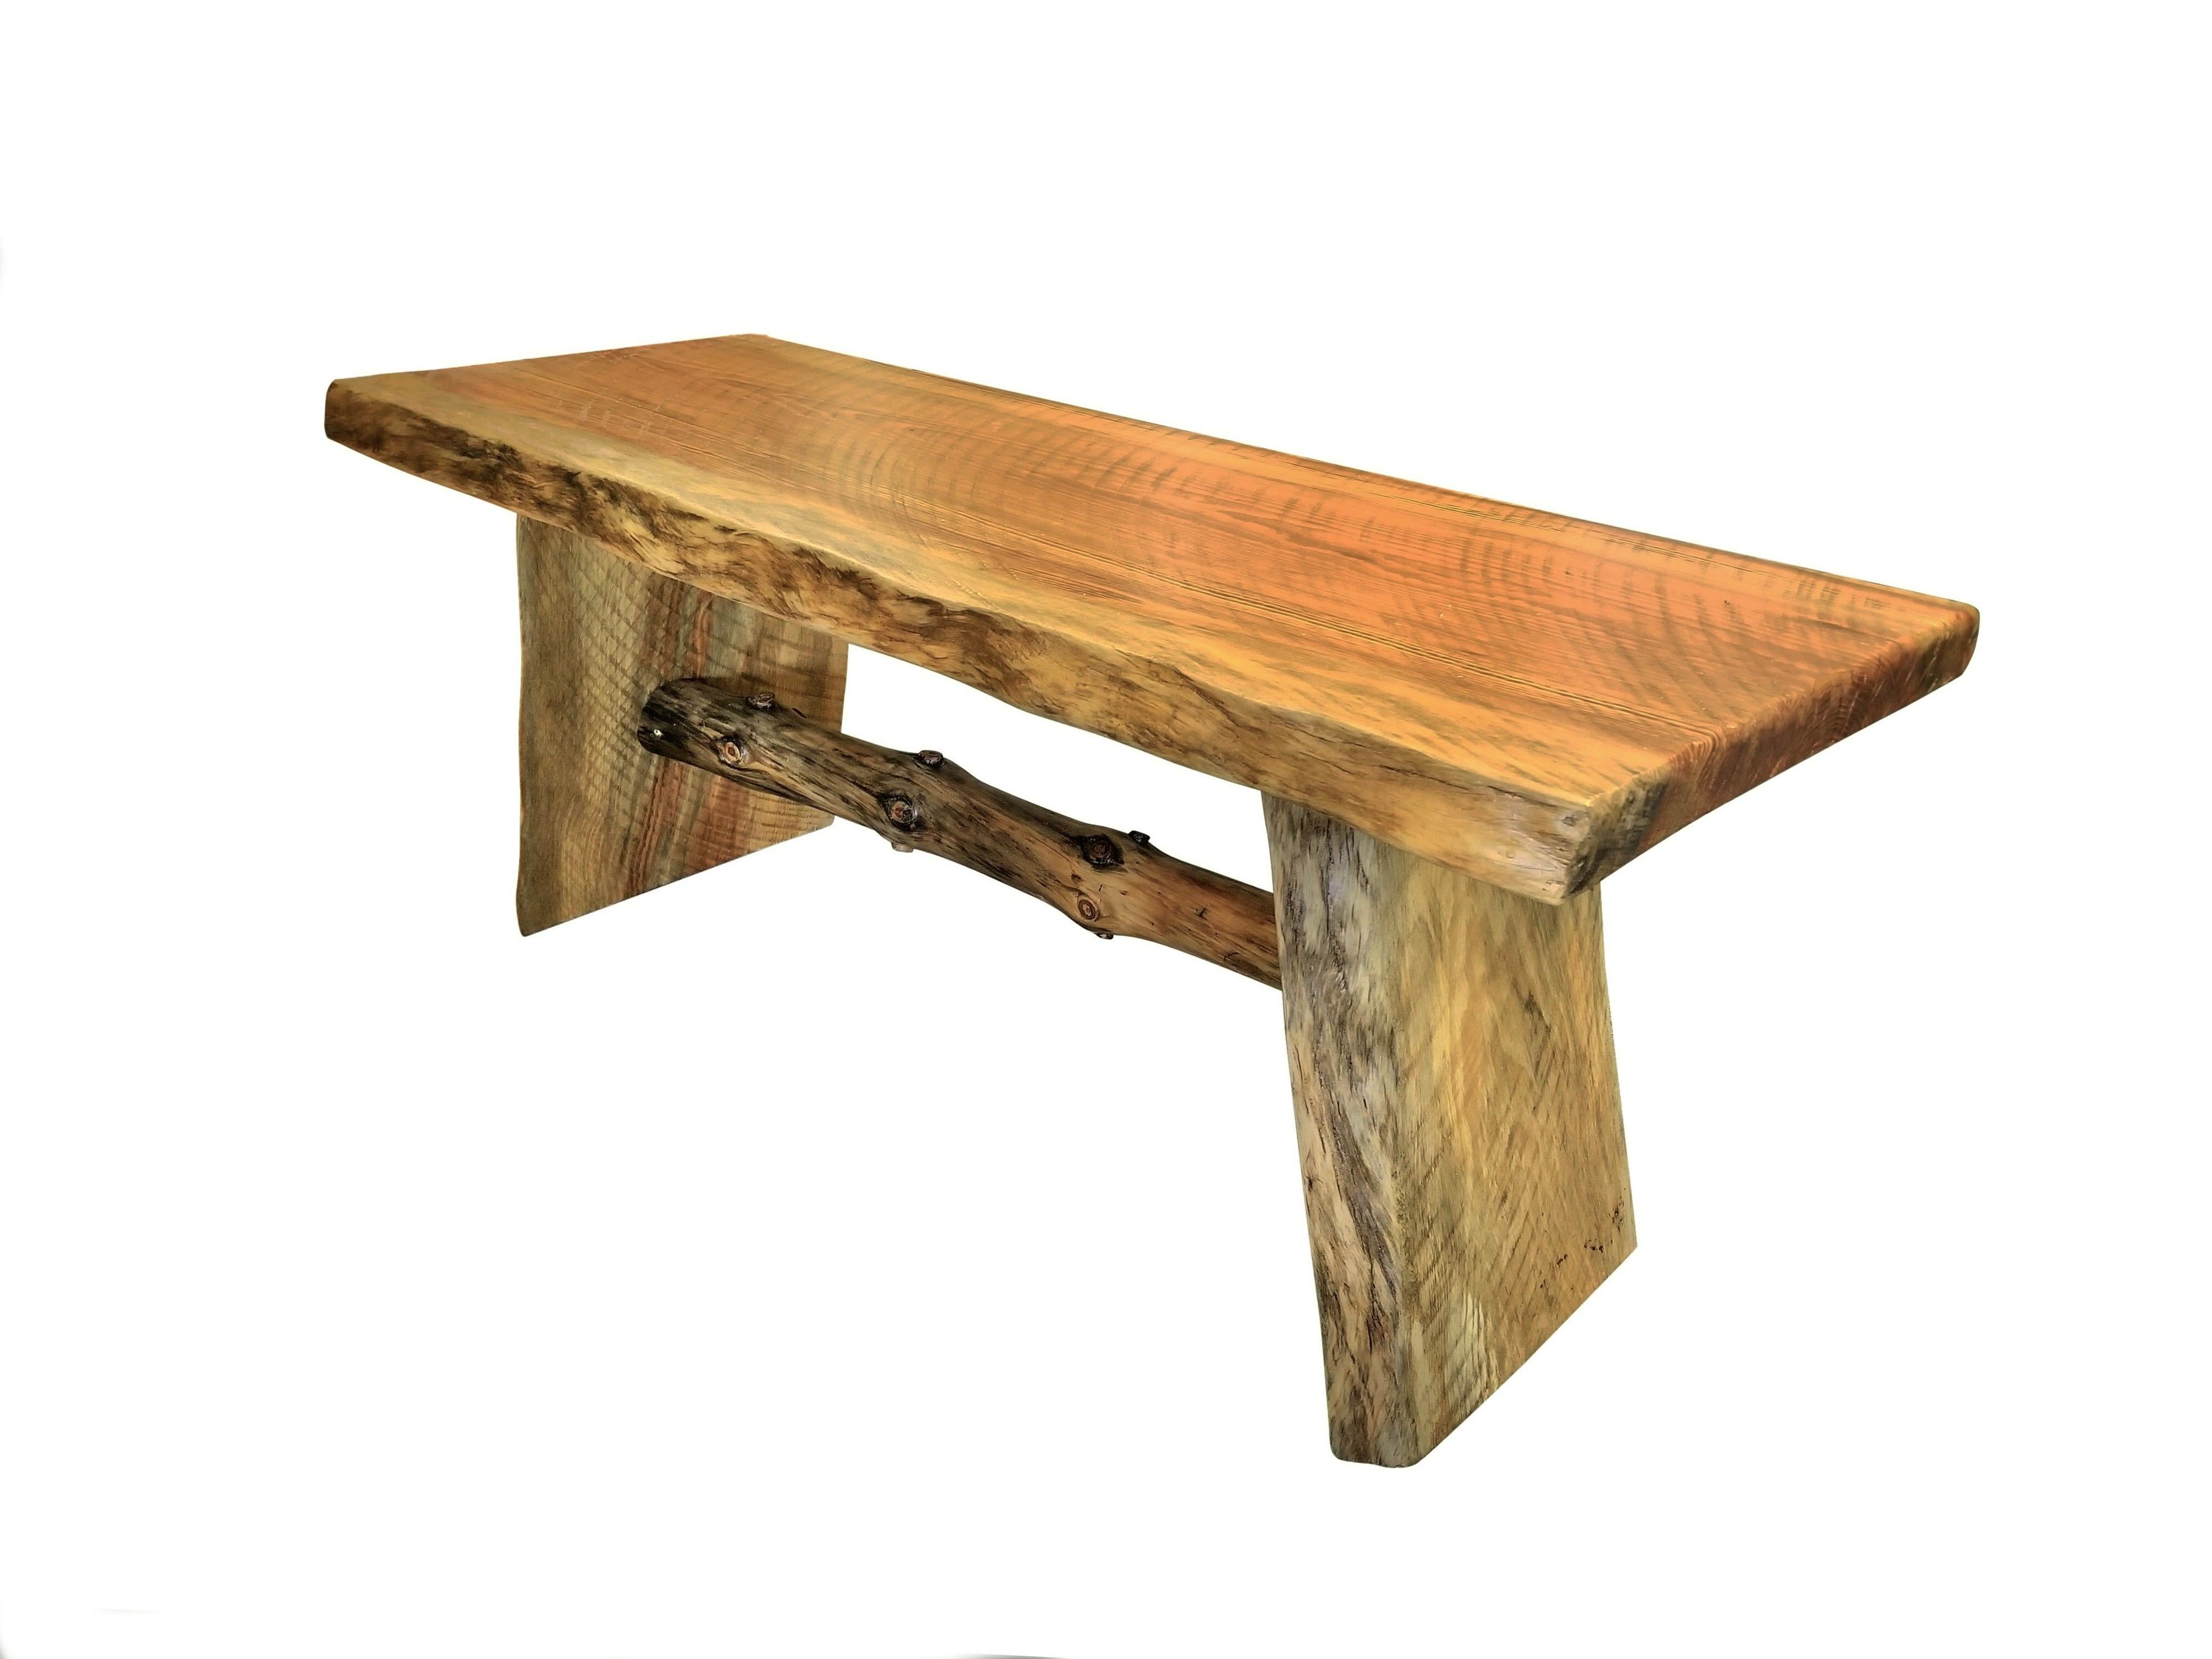 A rustic southern pine natural wood bench. Heavy, made with three pieces of solid plank wood with natural edging and richly grained throughout. Underneath a pine branch serves as a stretcher.